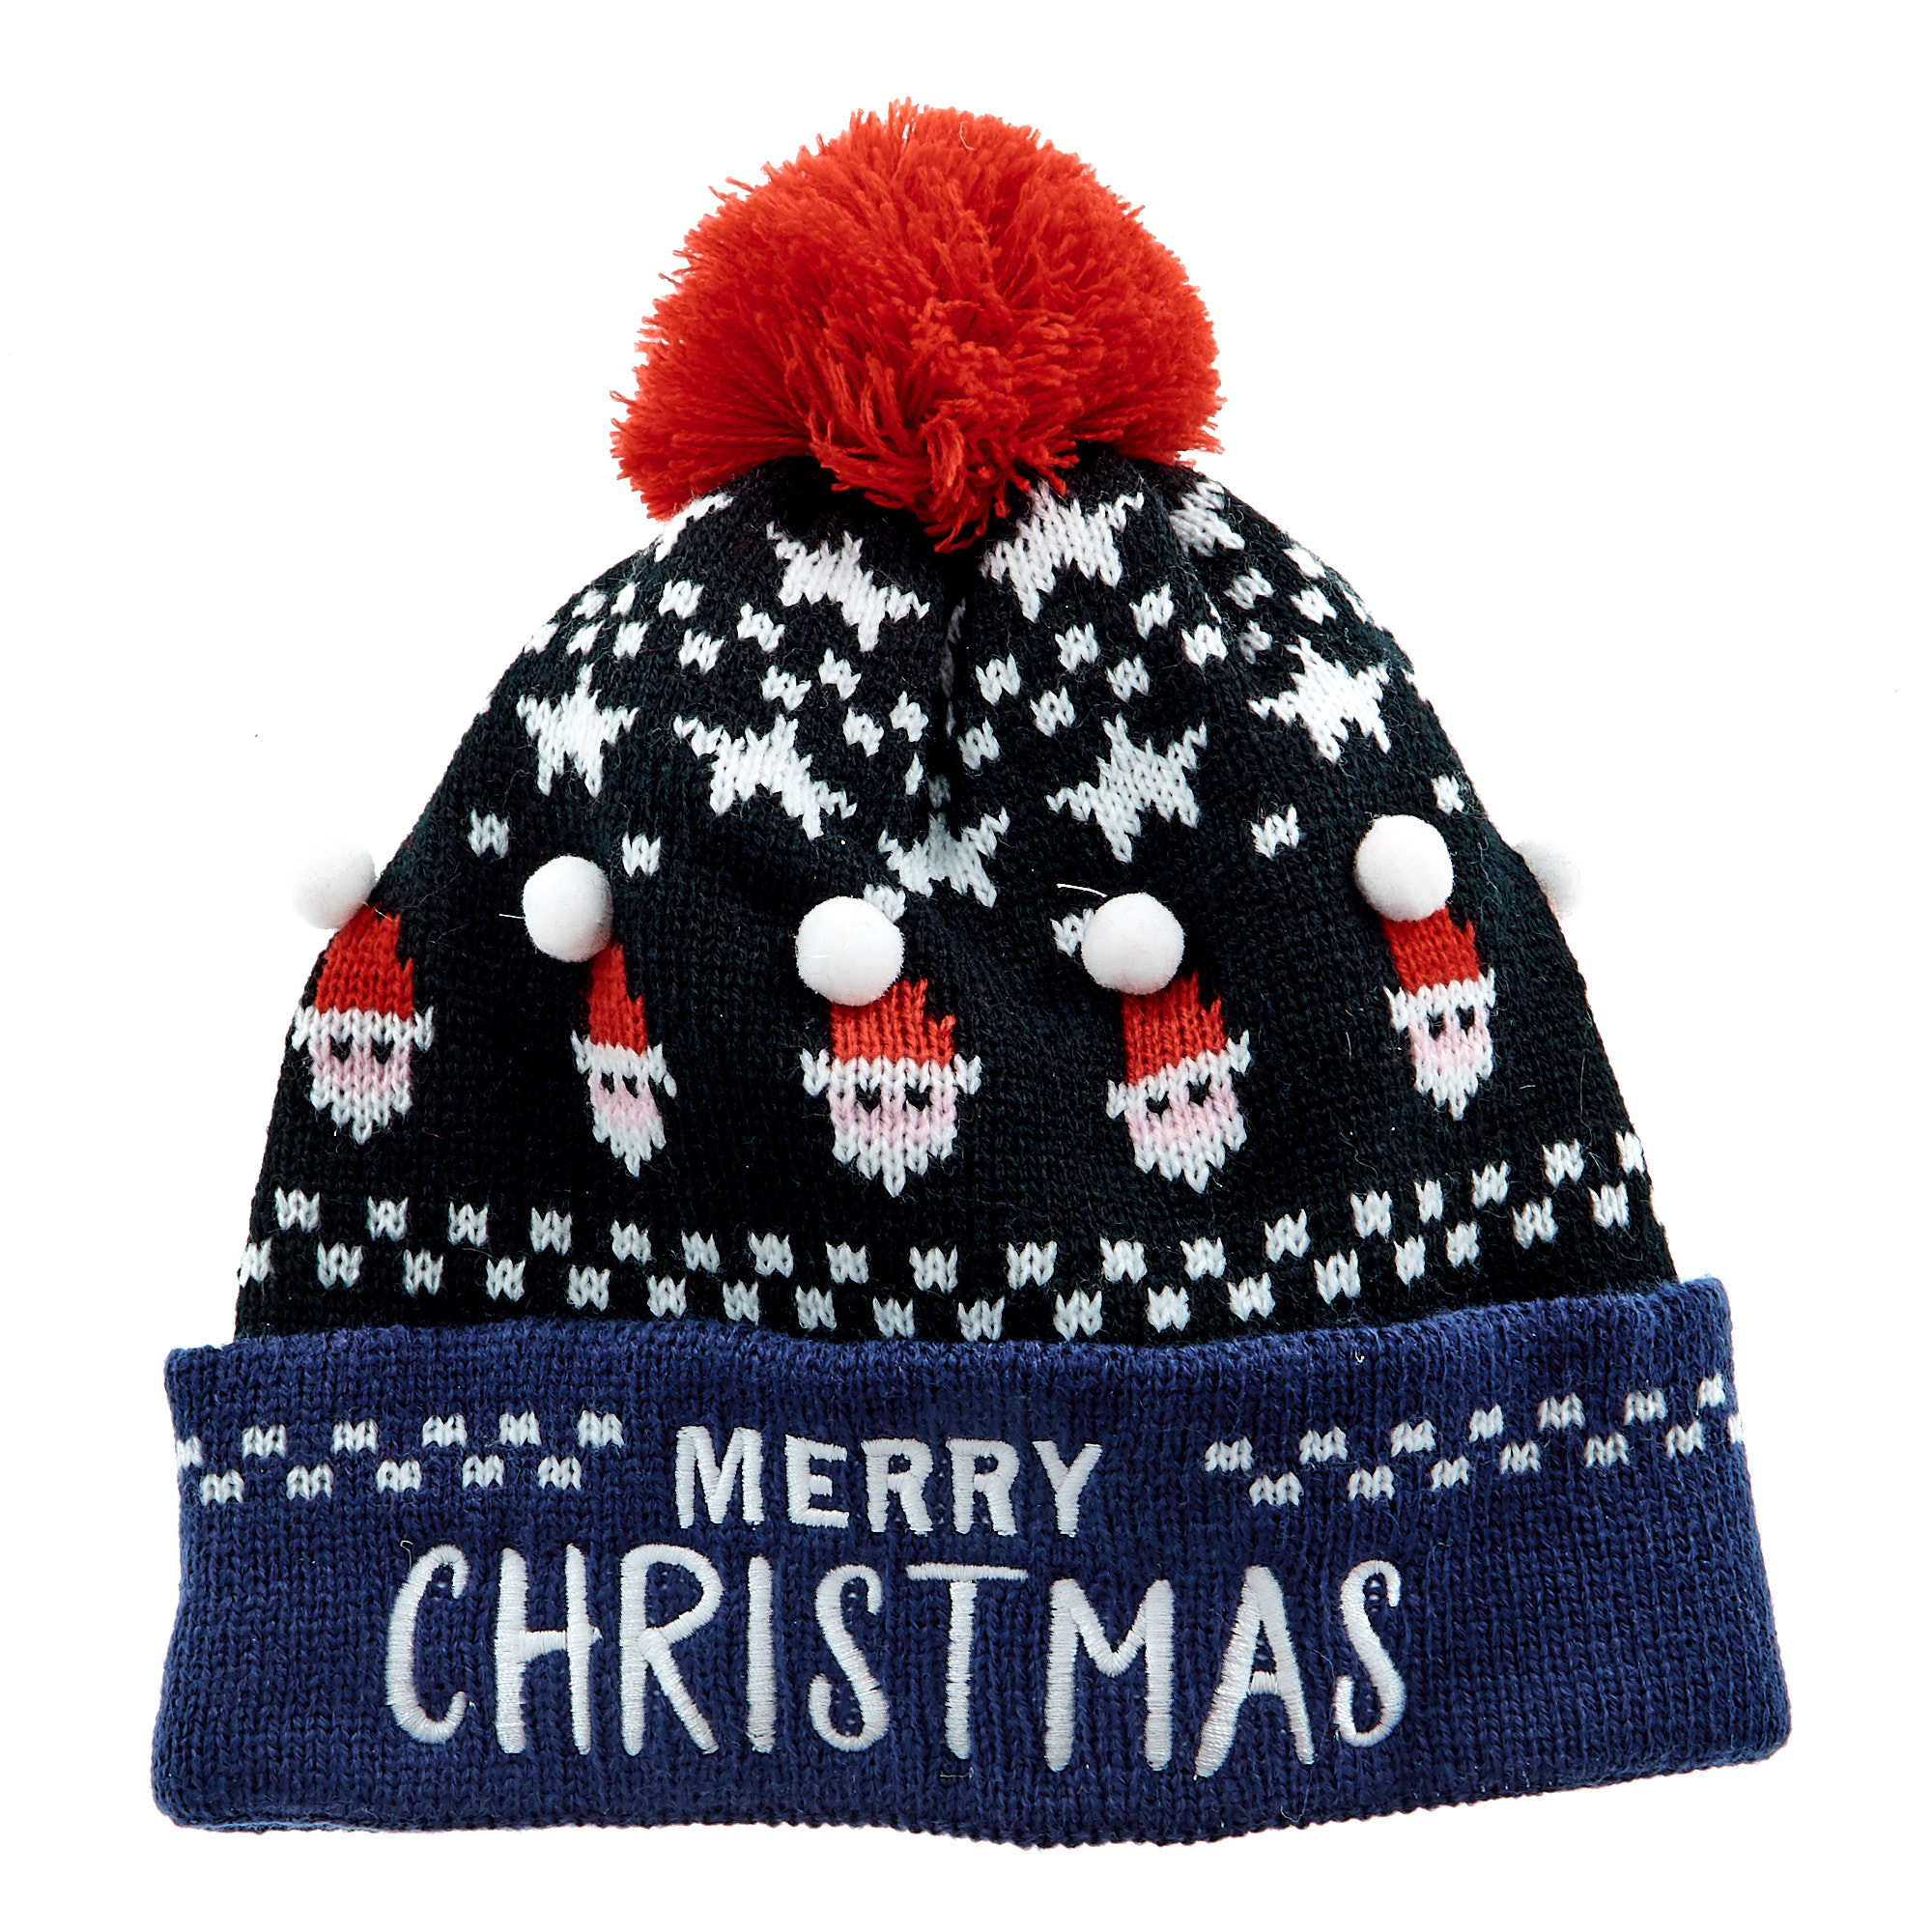 Merry Christmas Santa Knitted Hat